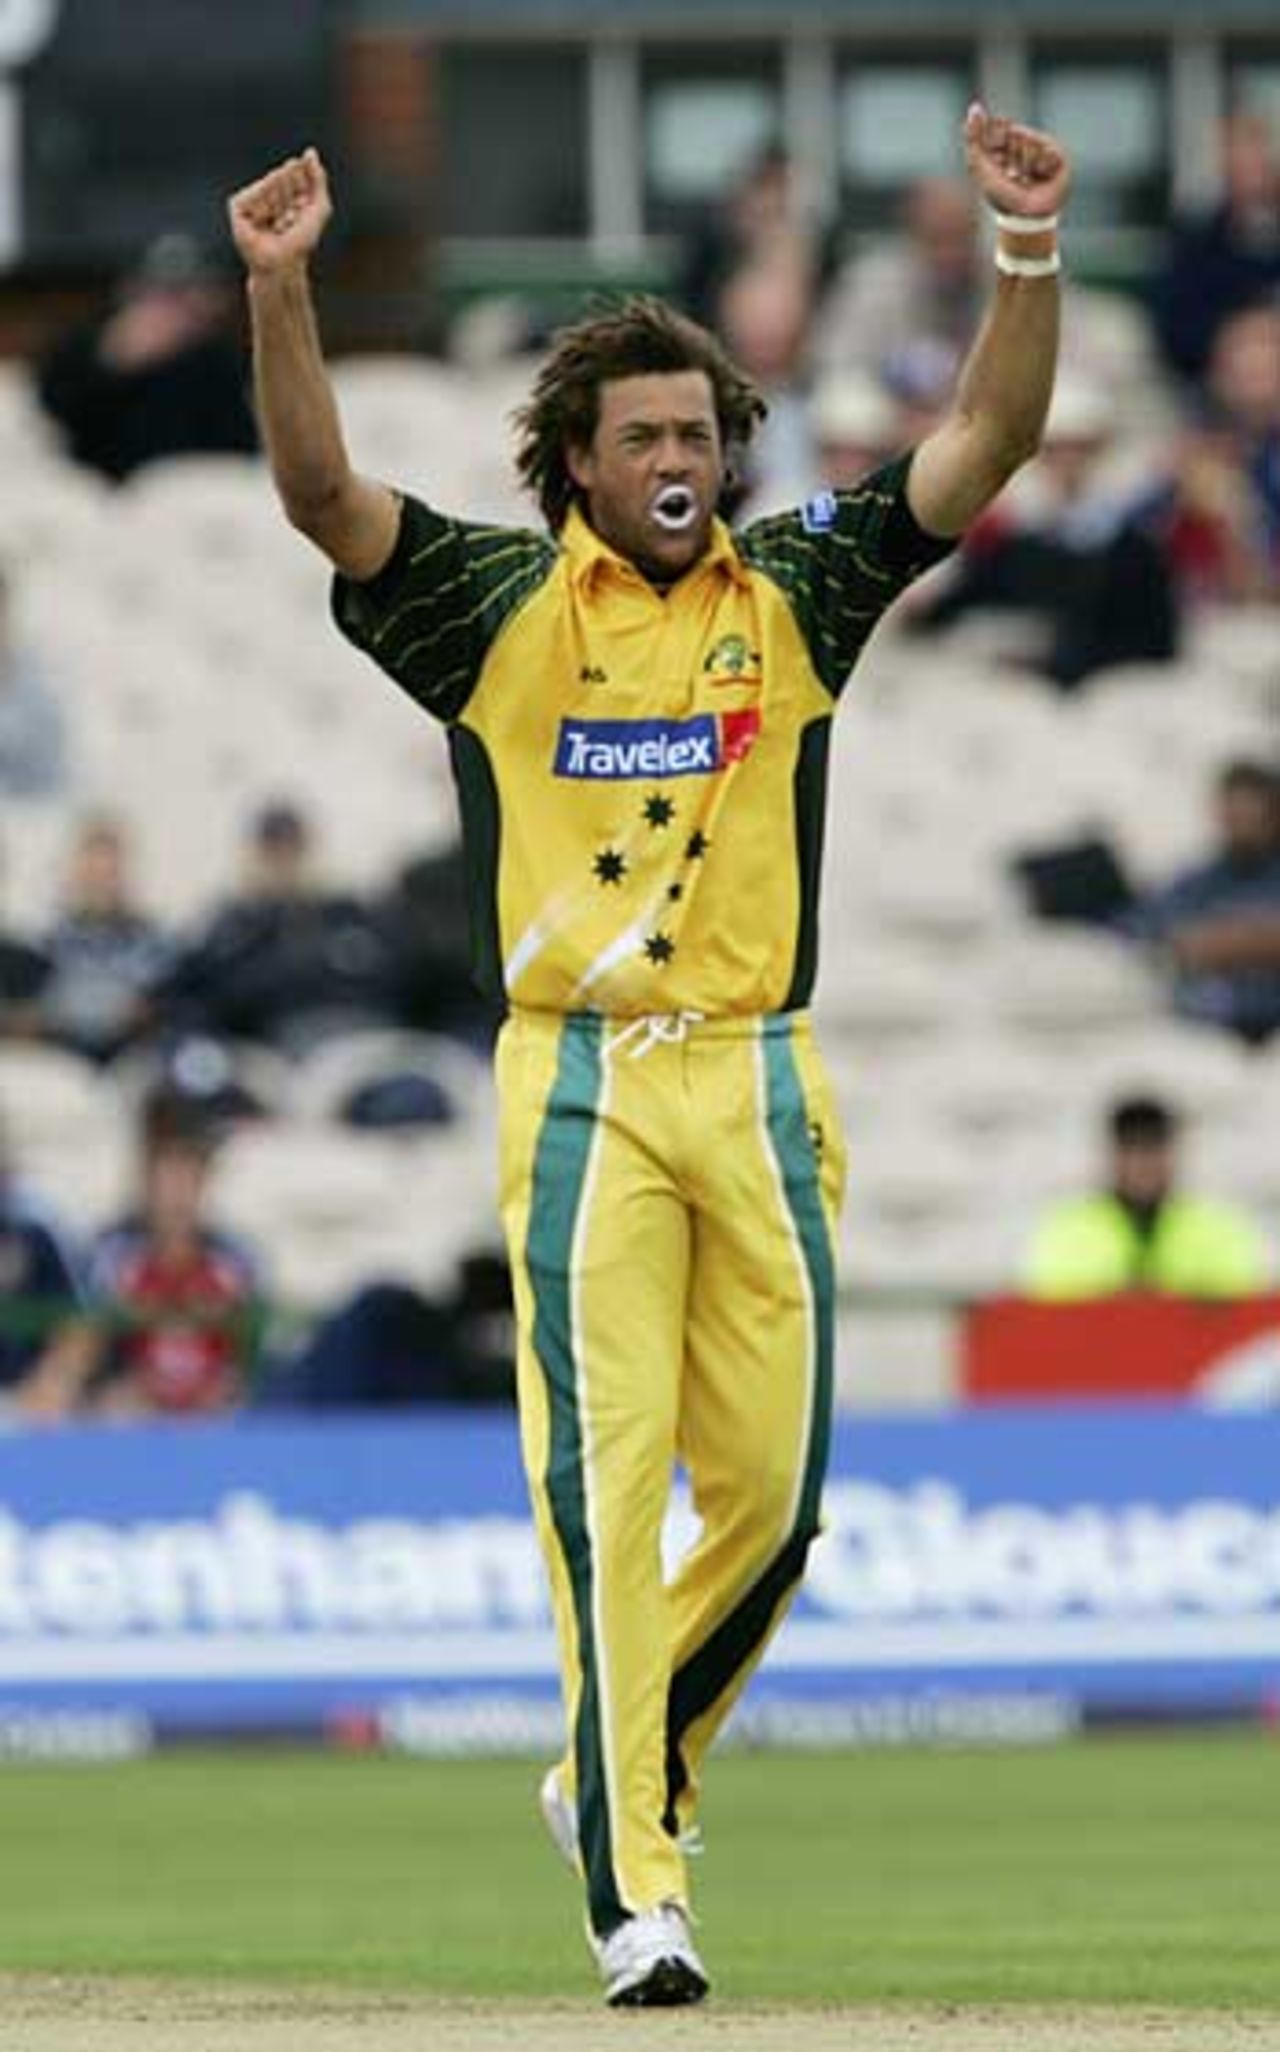 Andrew Symonds celebrates one of his five wickets, Australia v Bangladesh, NatWest Series, Old Trafford, June 25